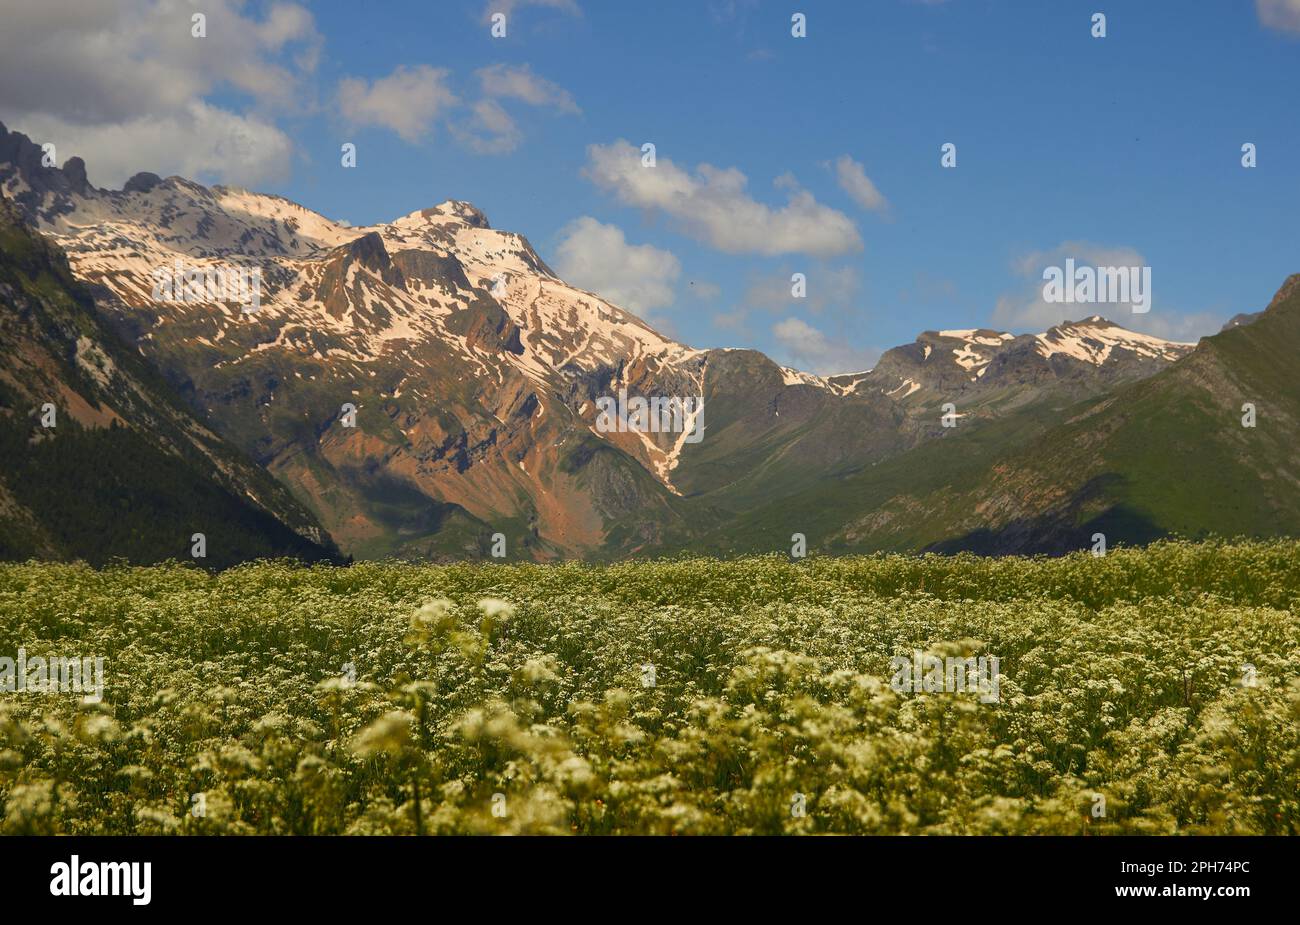 landscape of a mountain meadow full of spring flowers, in the background are some large mountains with snow on their peaks, green and ocher tones with Stock Photo